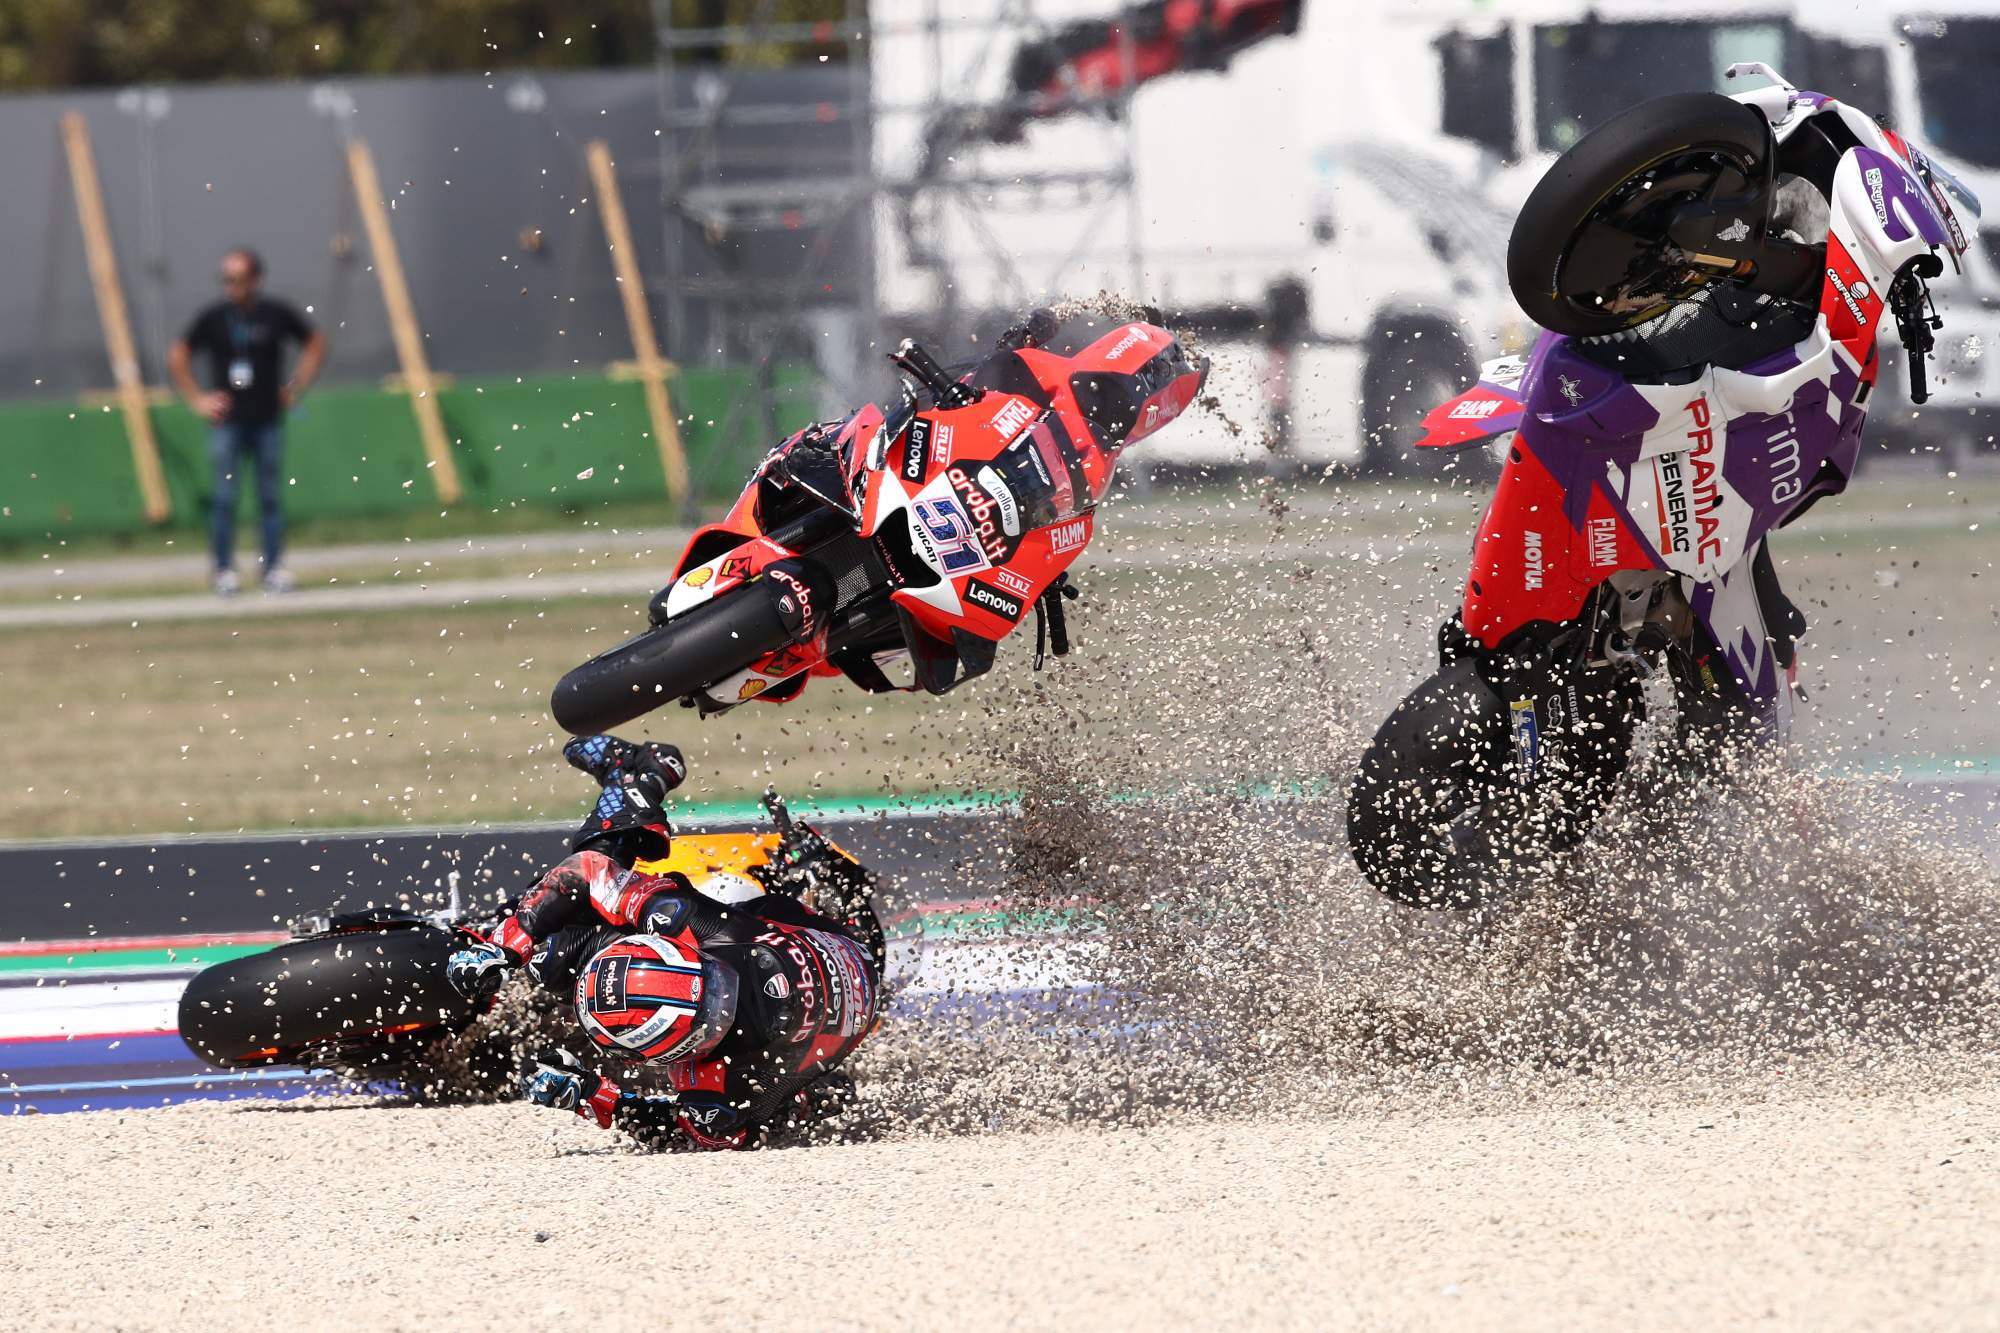 MotoGP’s two Misano multi-bike crashes of 2022. Media sourced from The Race.